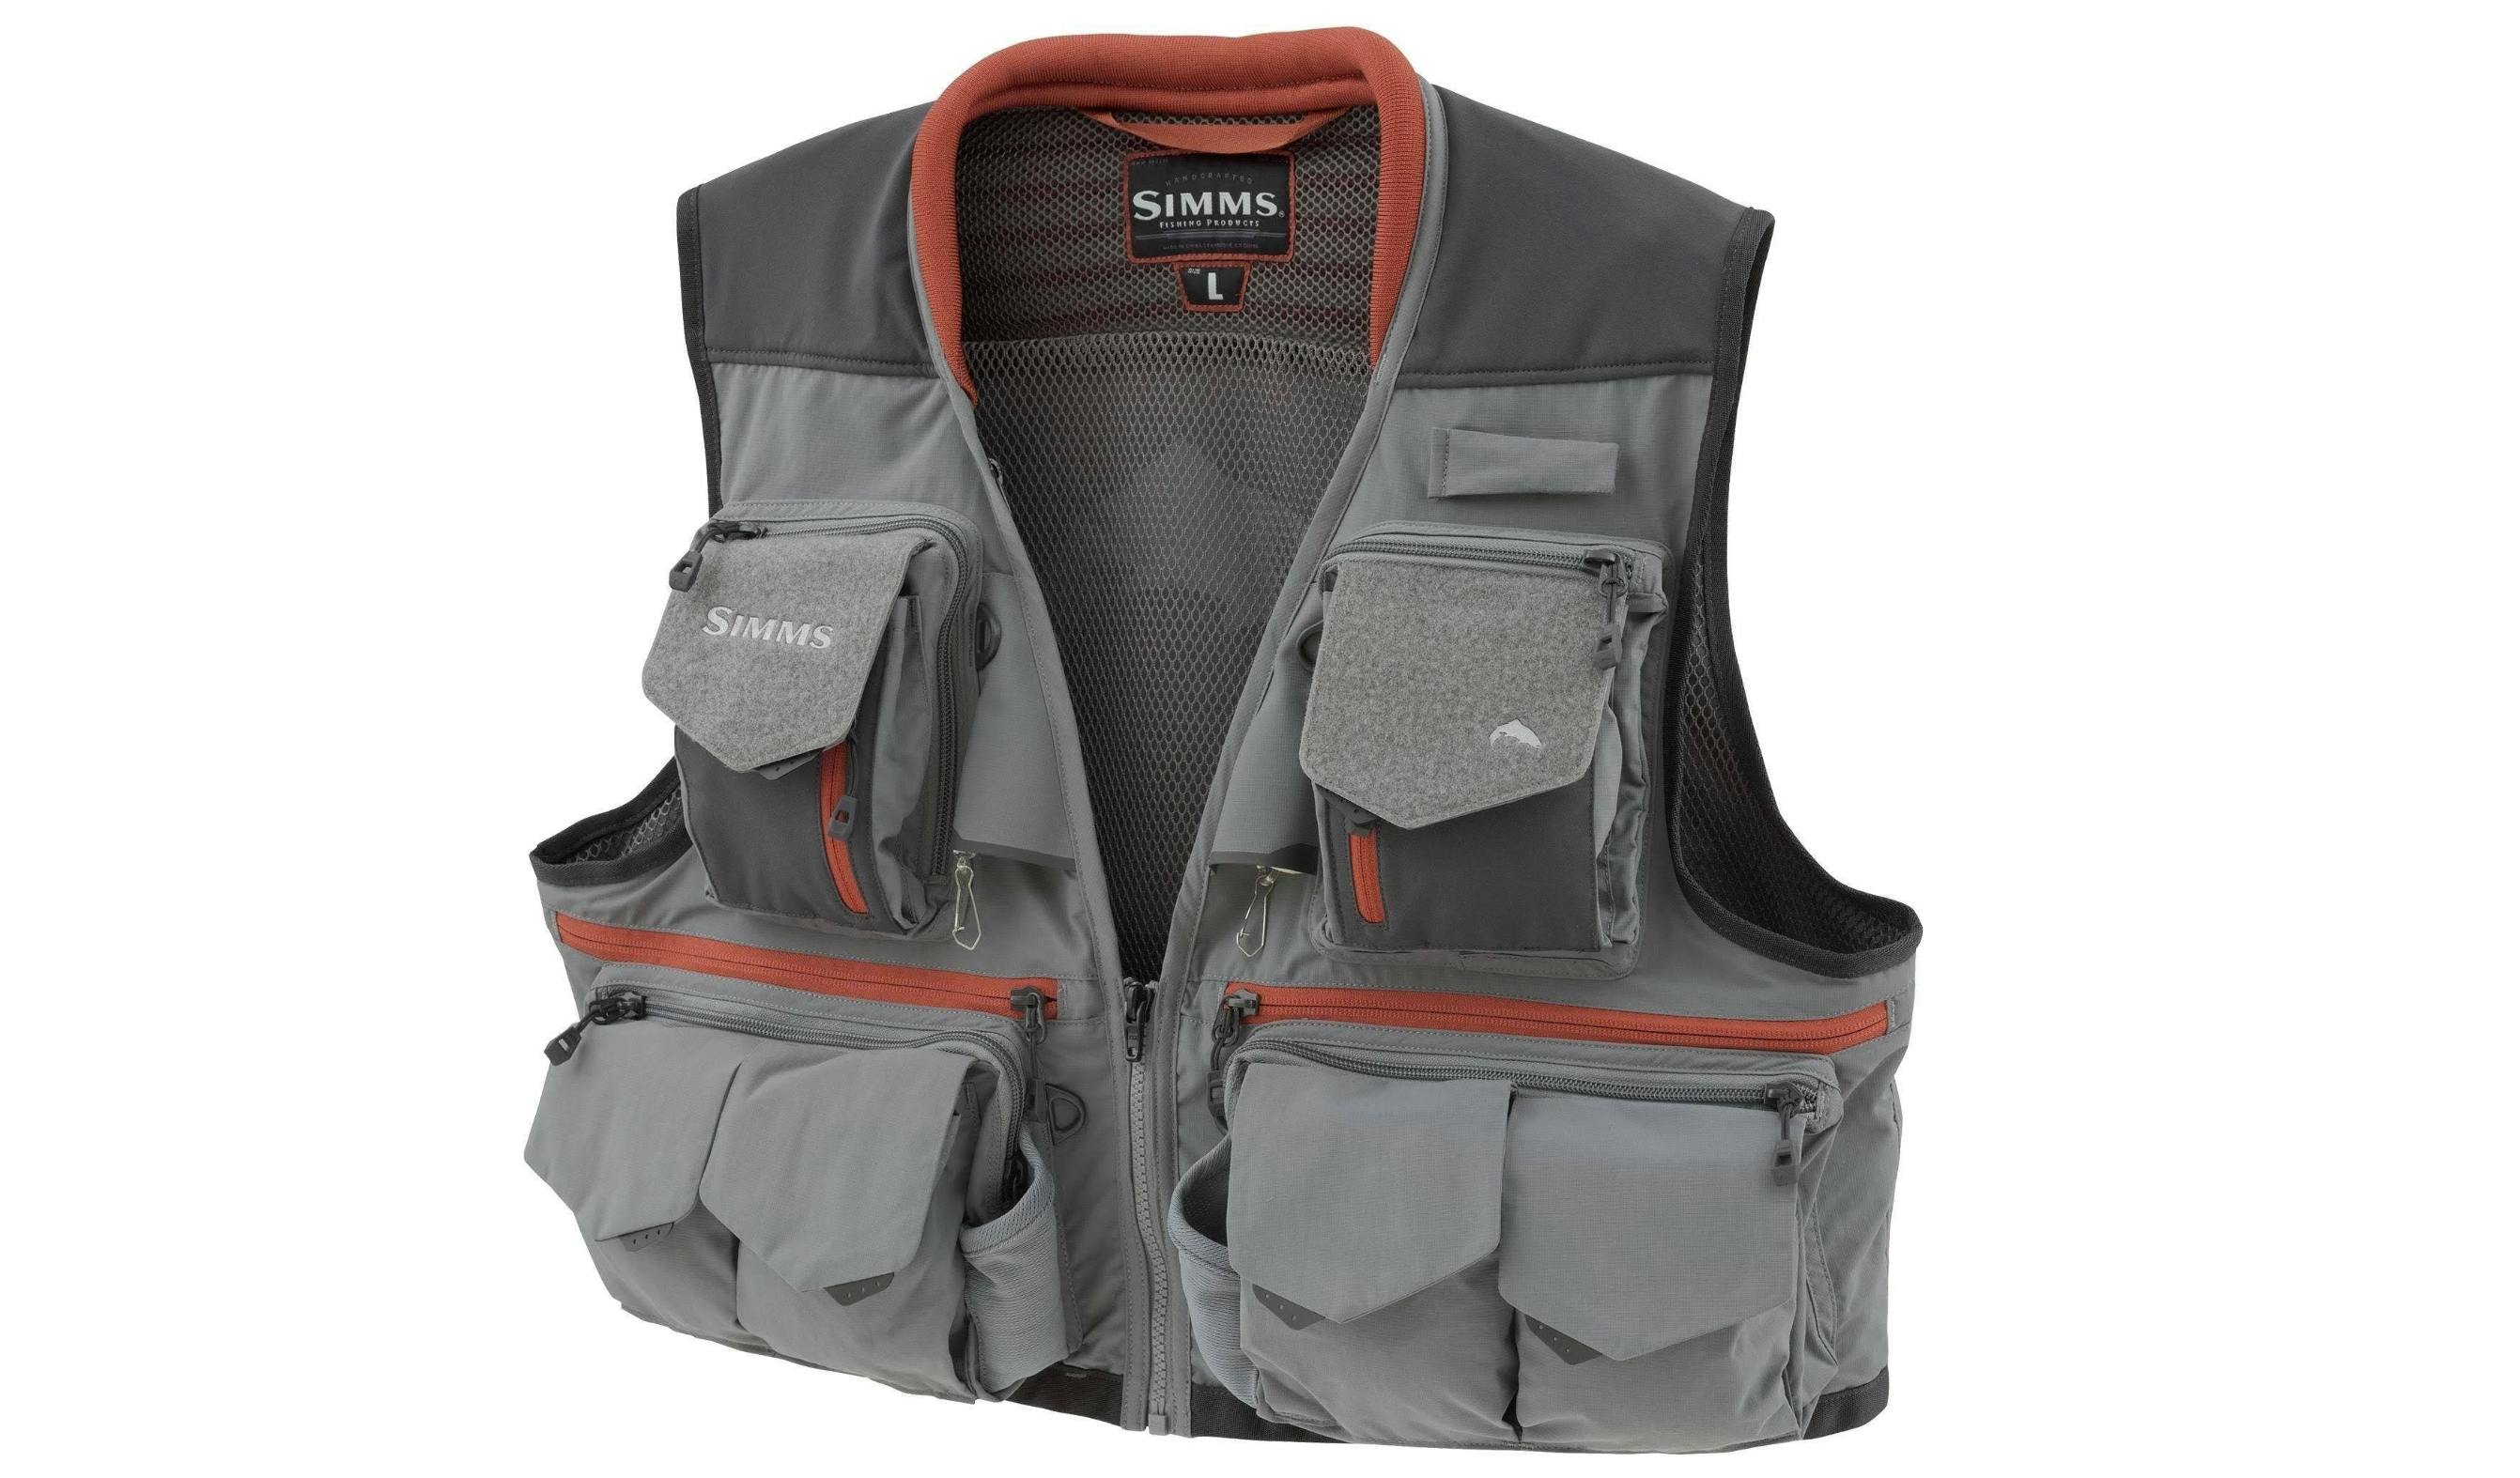 Product image of a Simms fly fishing vest.